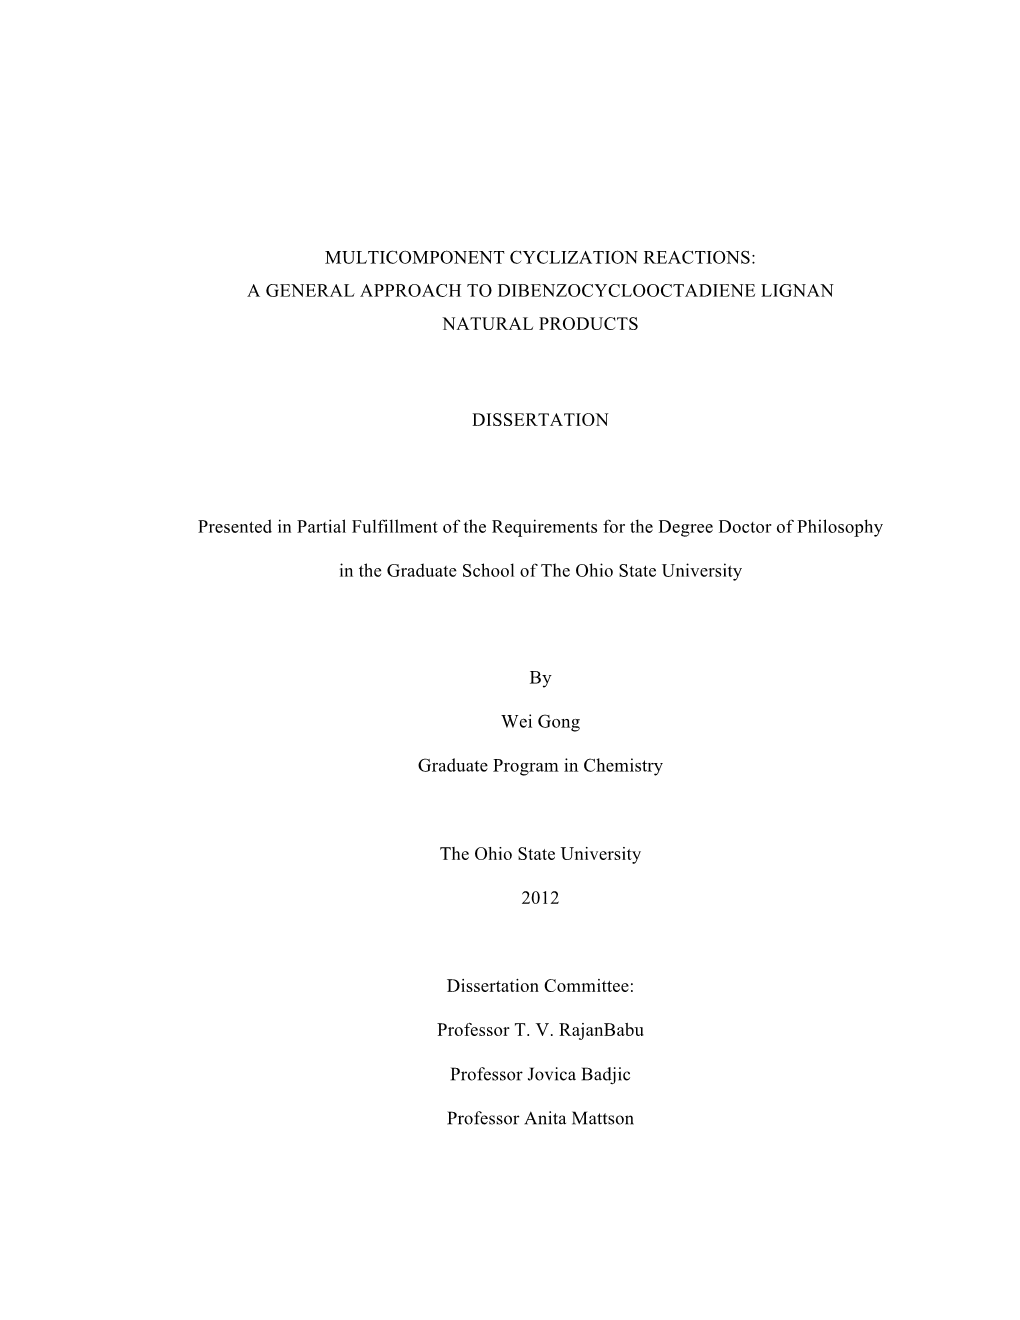 Gong Ph.D. Thesis Final